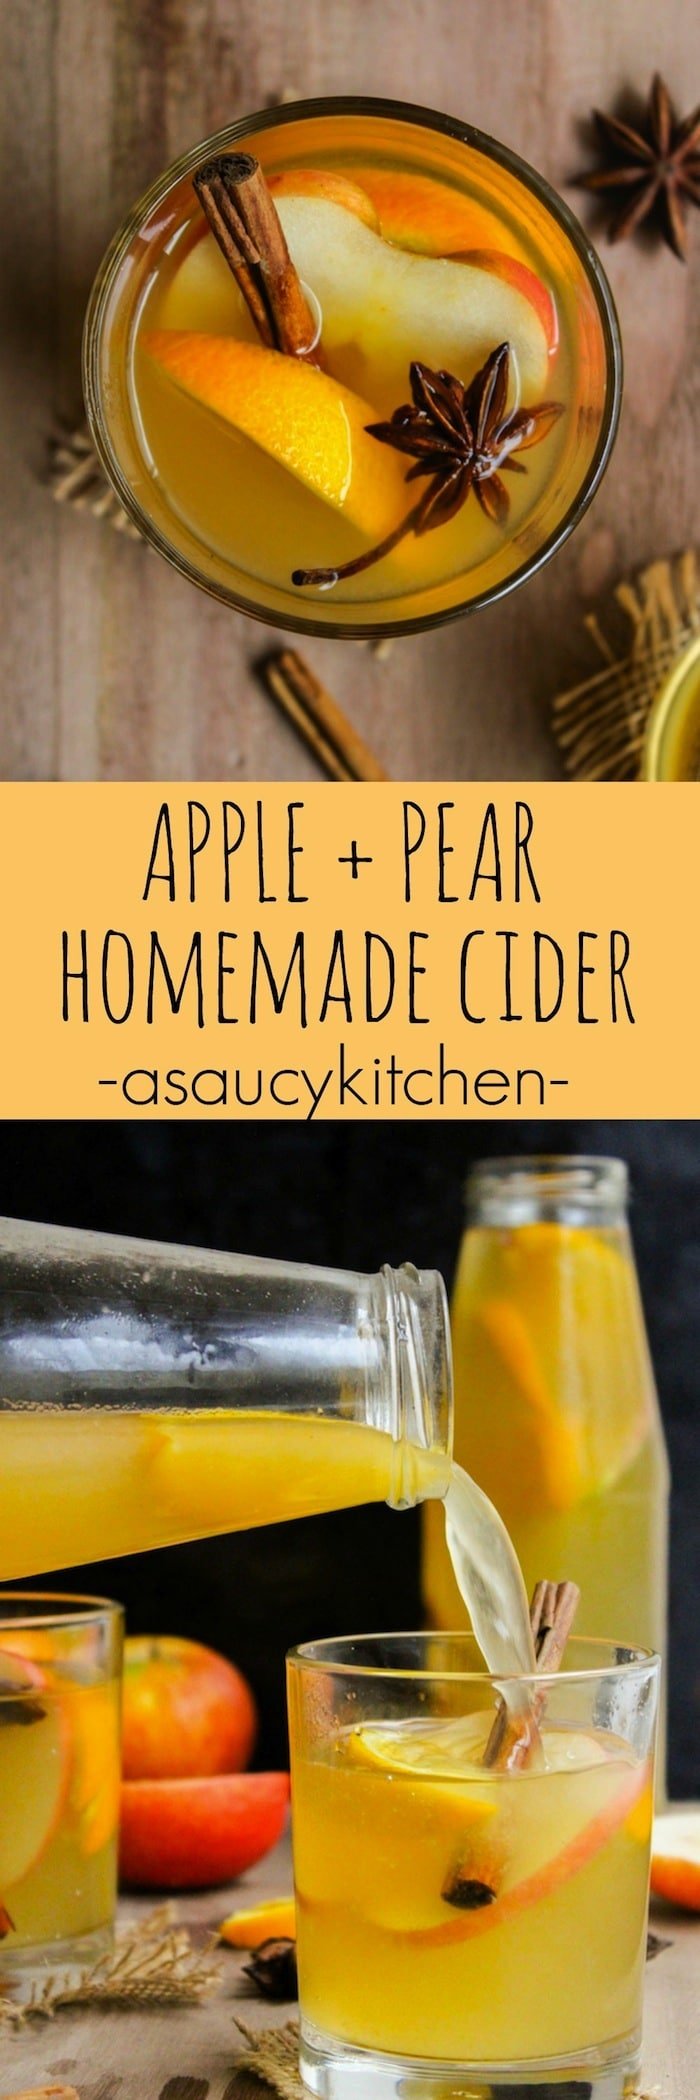 Fall in love with this apple pear cider made with fresh fruit and seasonal spices. Make in the crock pot and enjoy all day with the smell of cider brewing in the air! @asaucykitchen